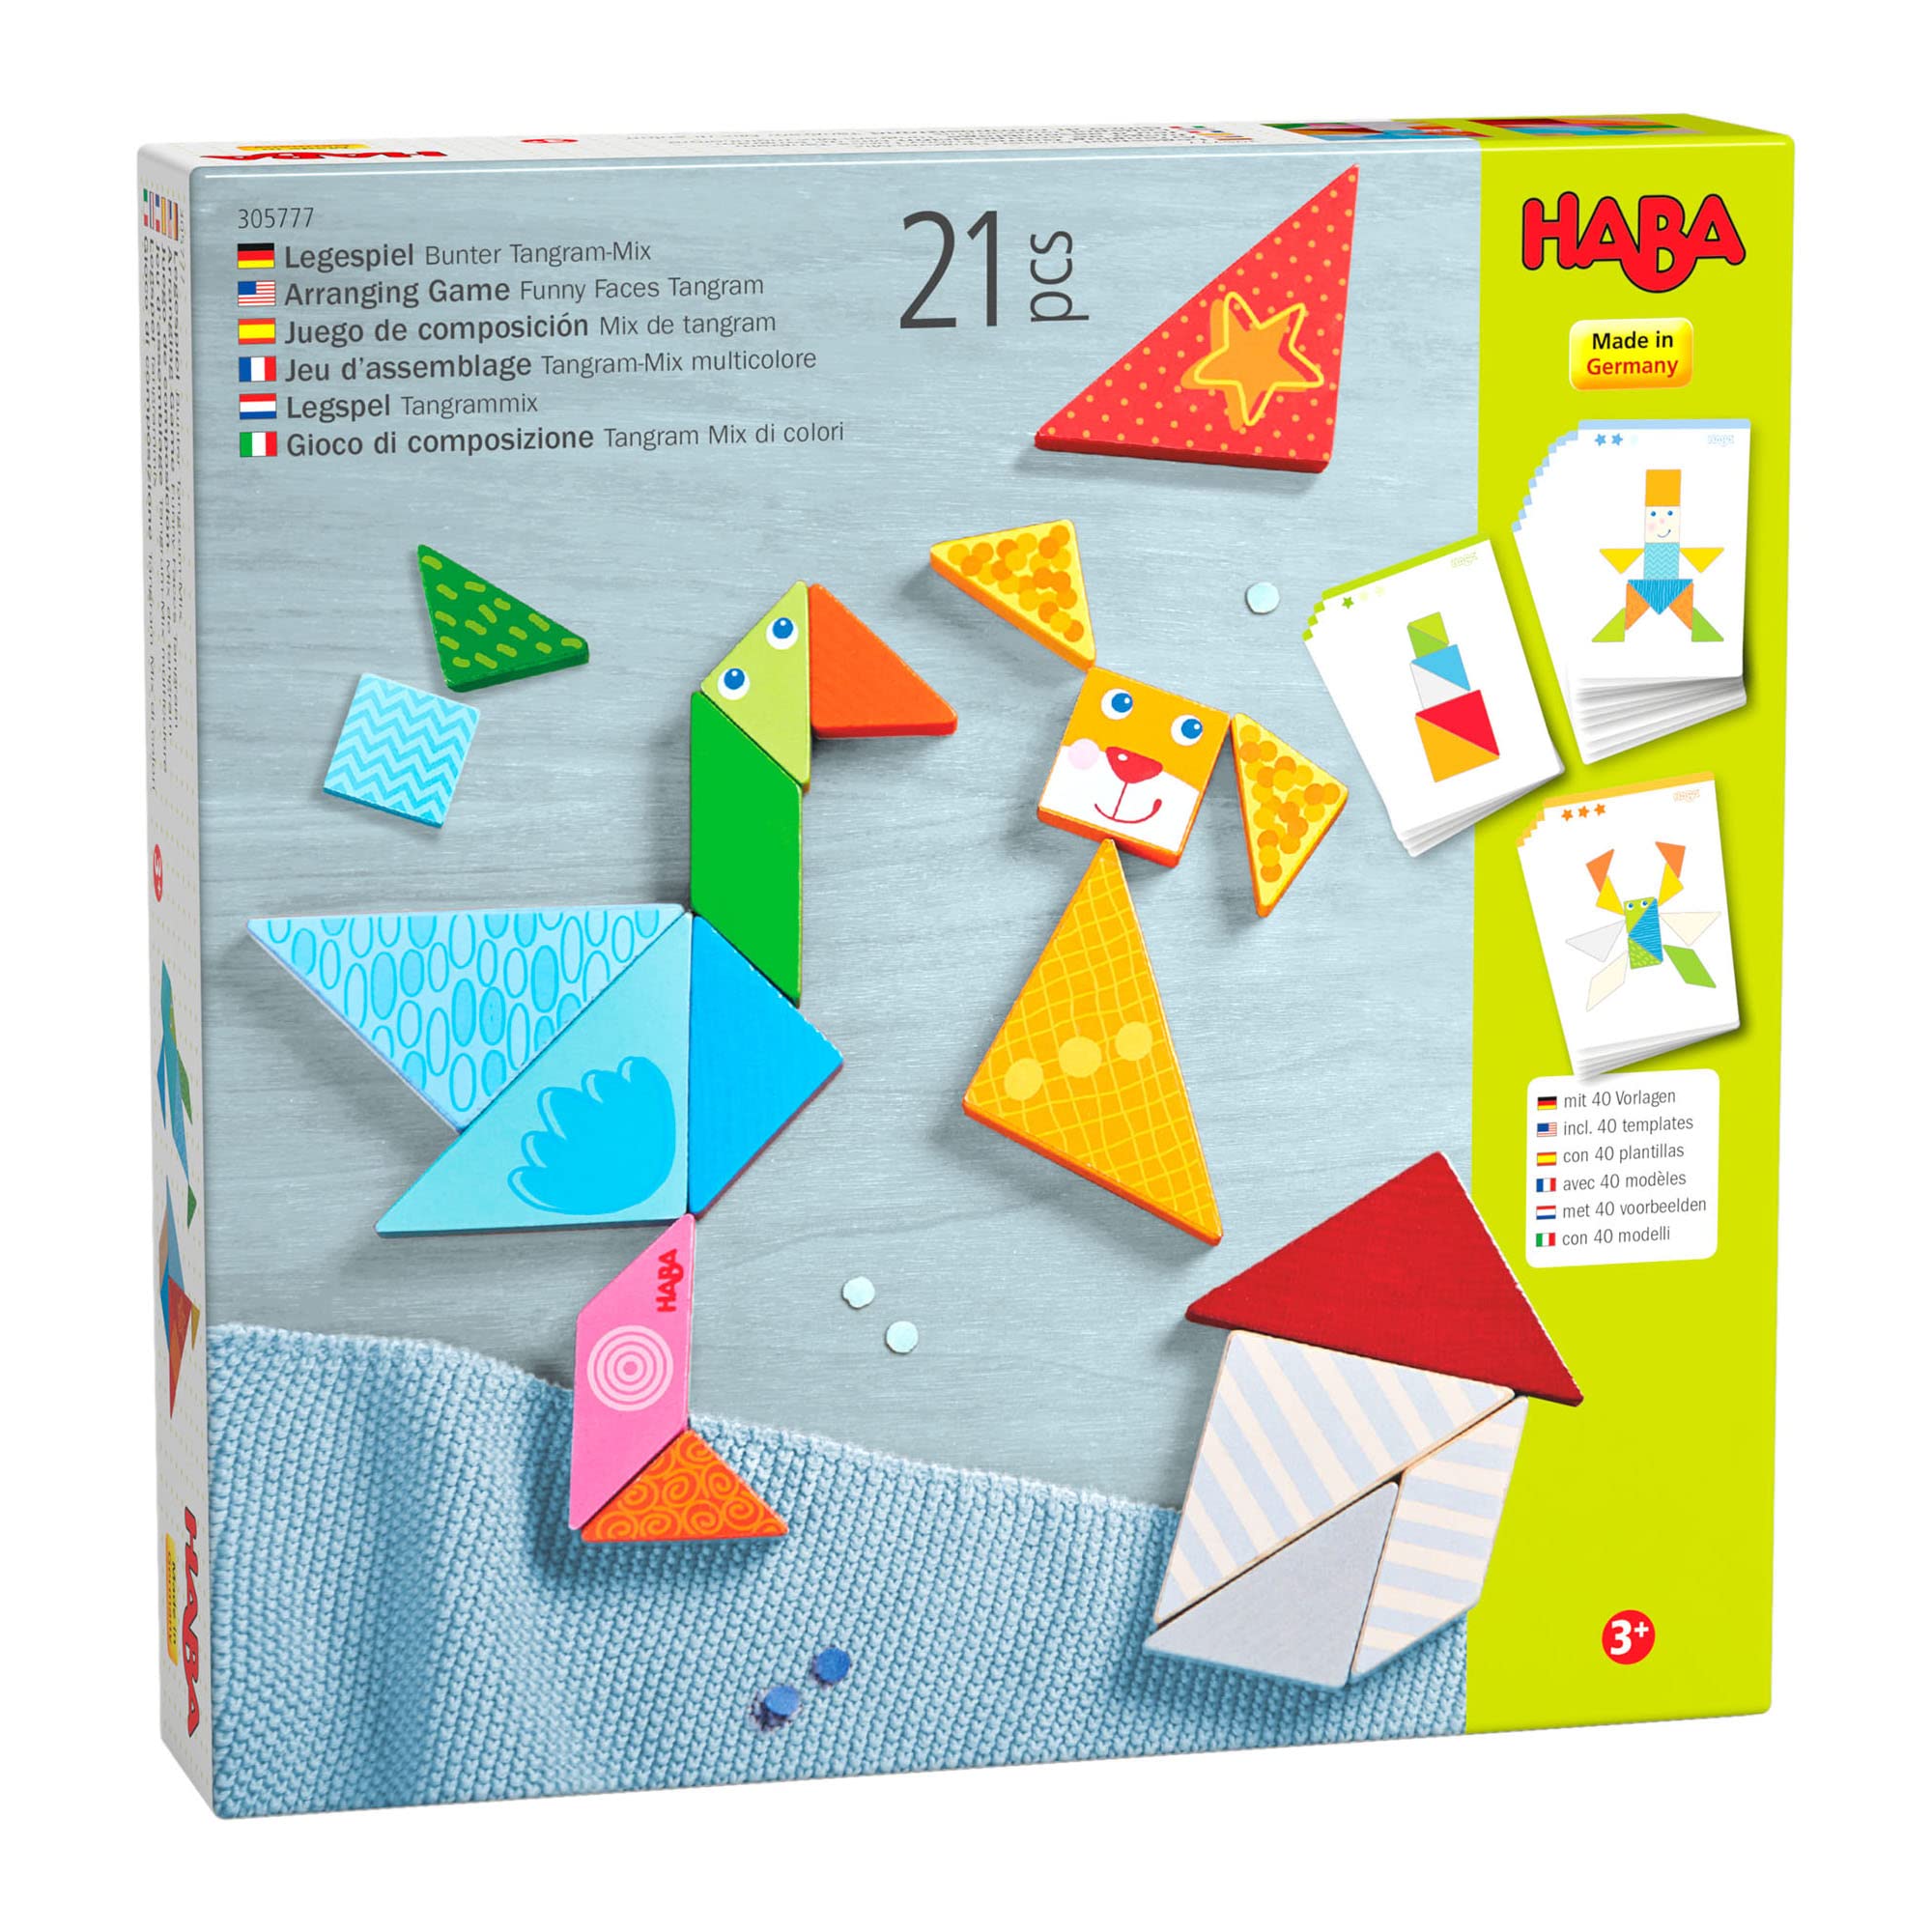 HABA Funny Faces Tangram Wooden Tile Arranging Game with 20 Template Cards (Made in Germany)